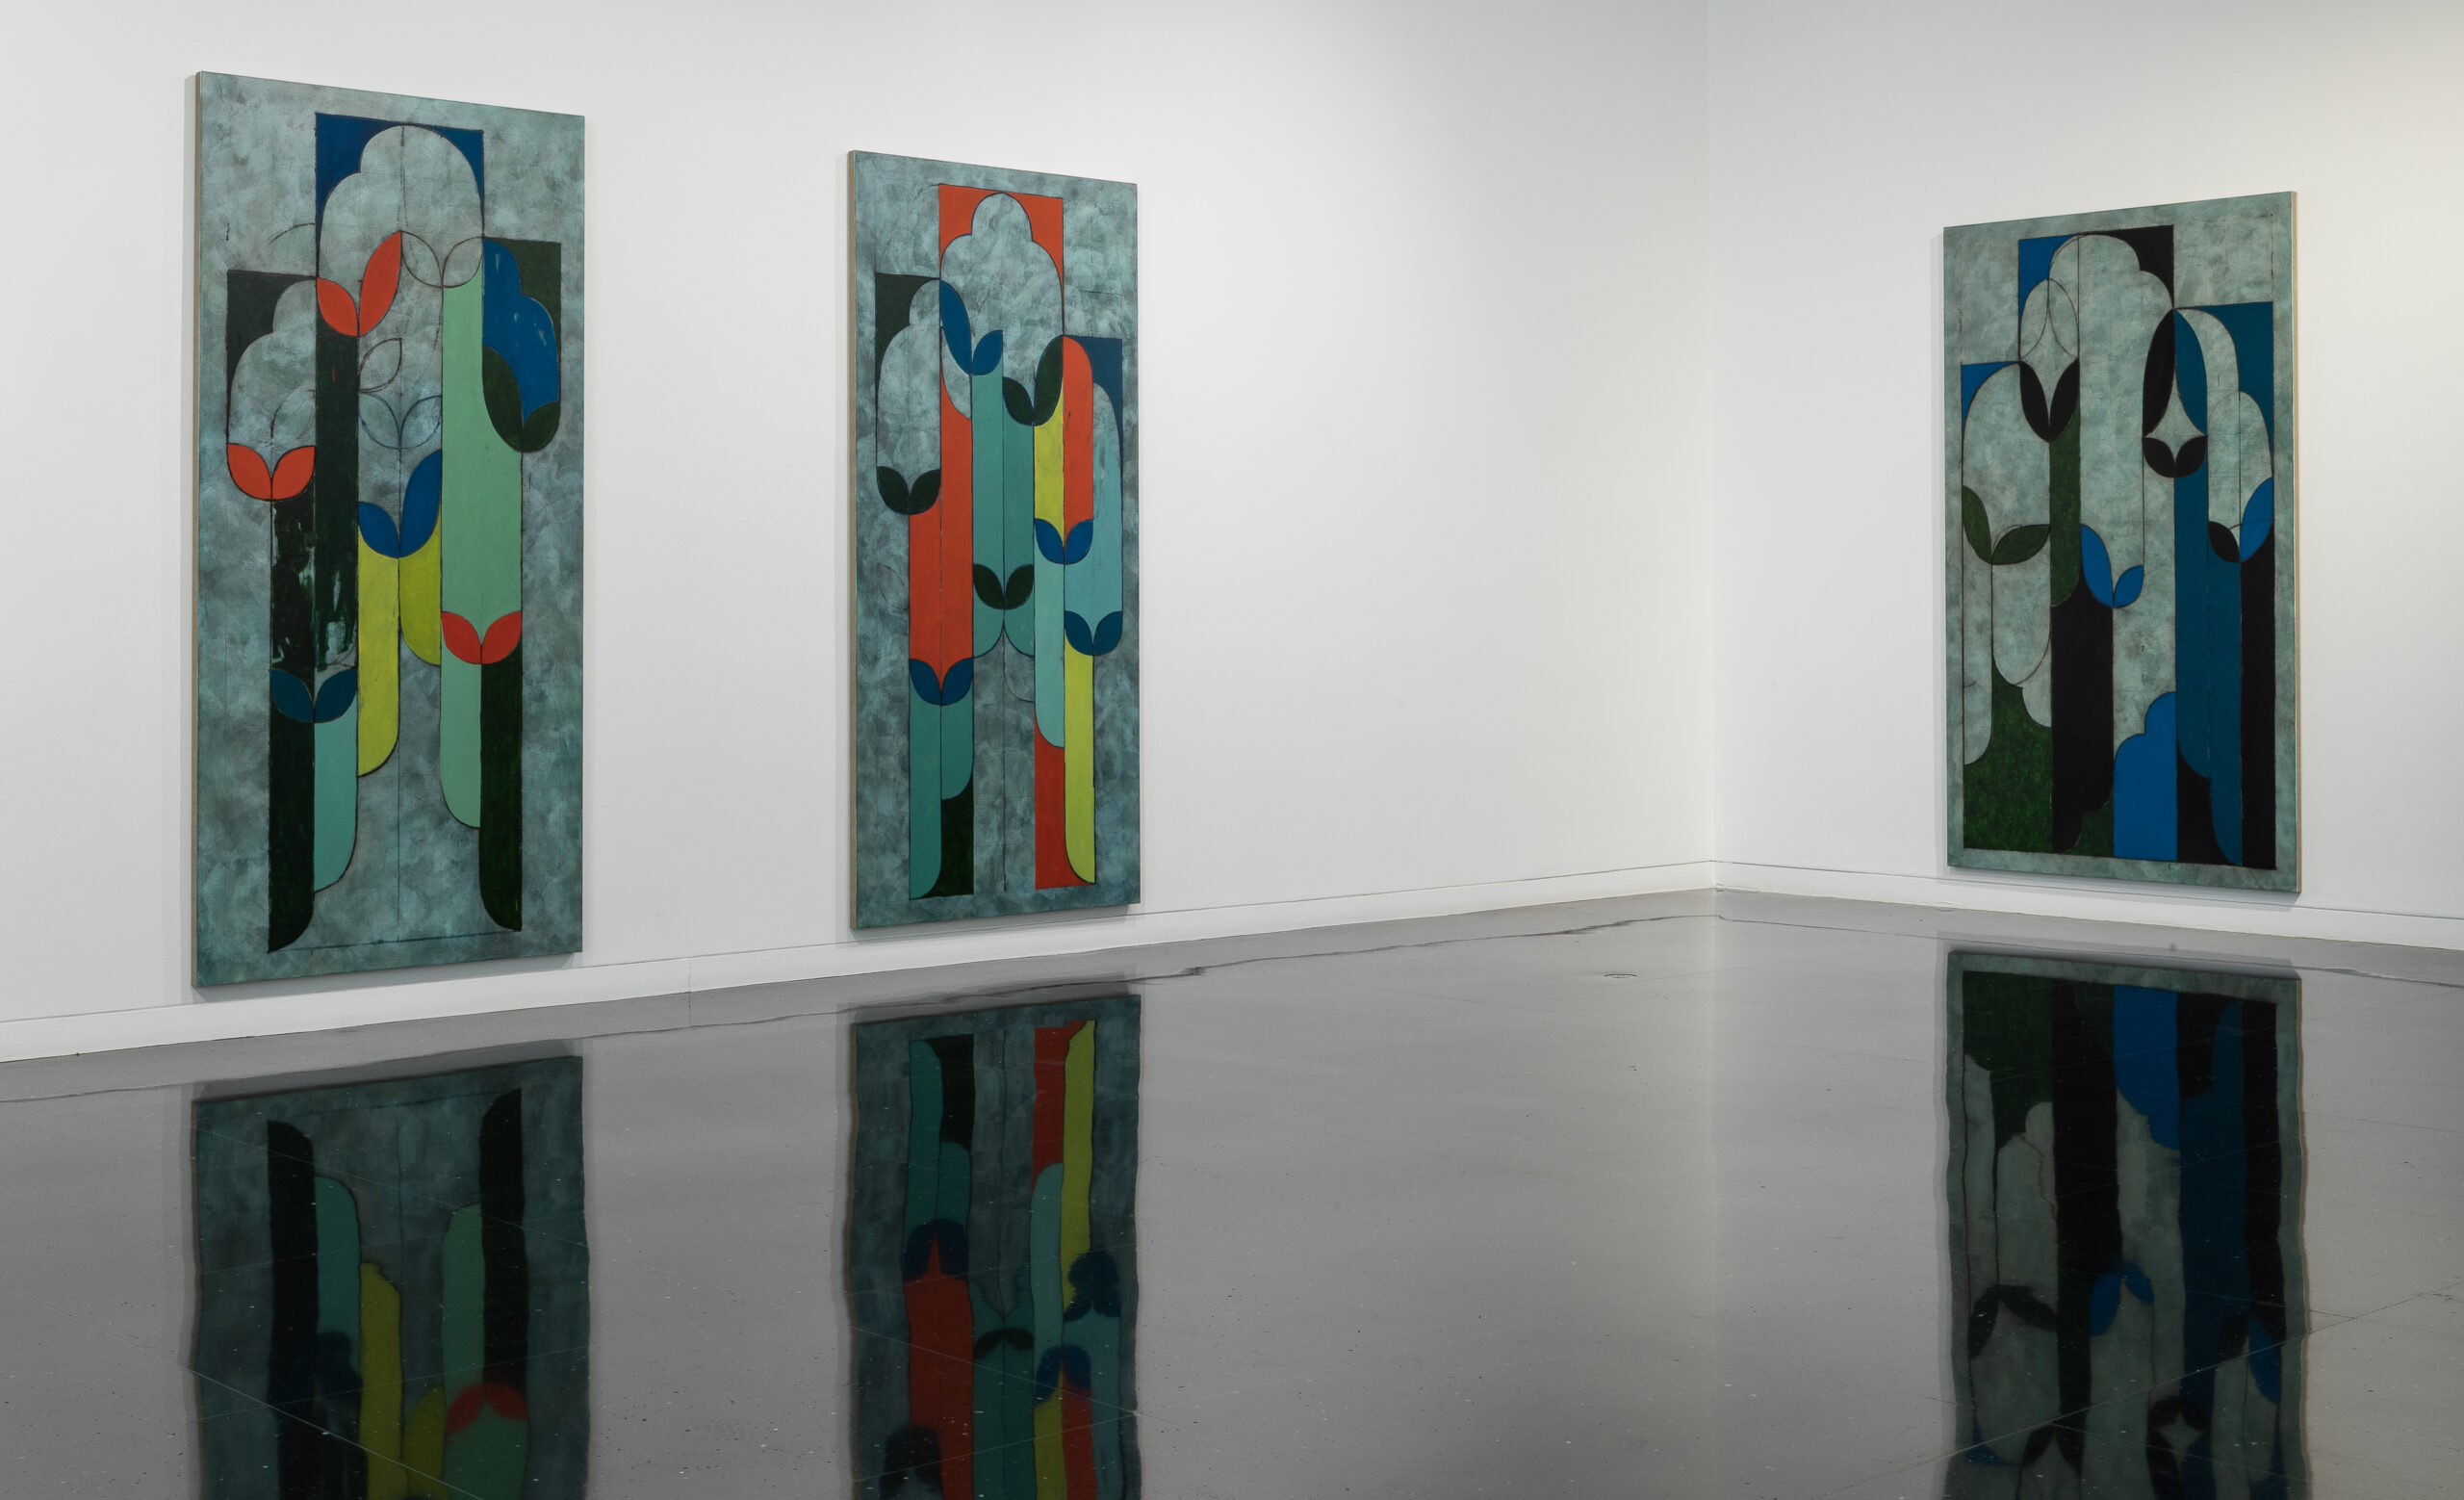 Gallery interior with three large decorative abstract paintings hung on the wall.